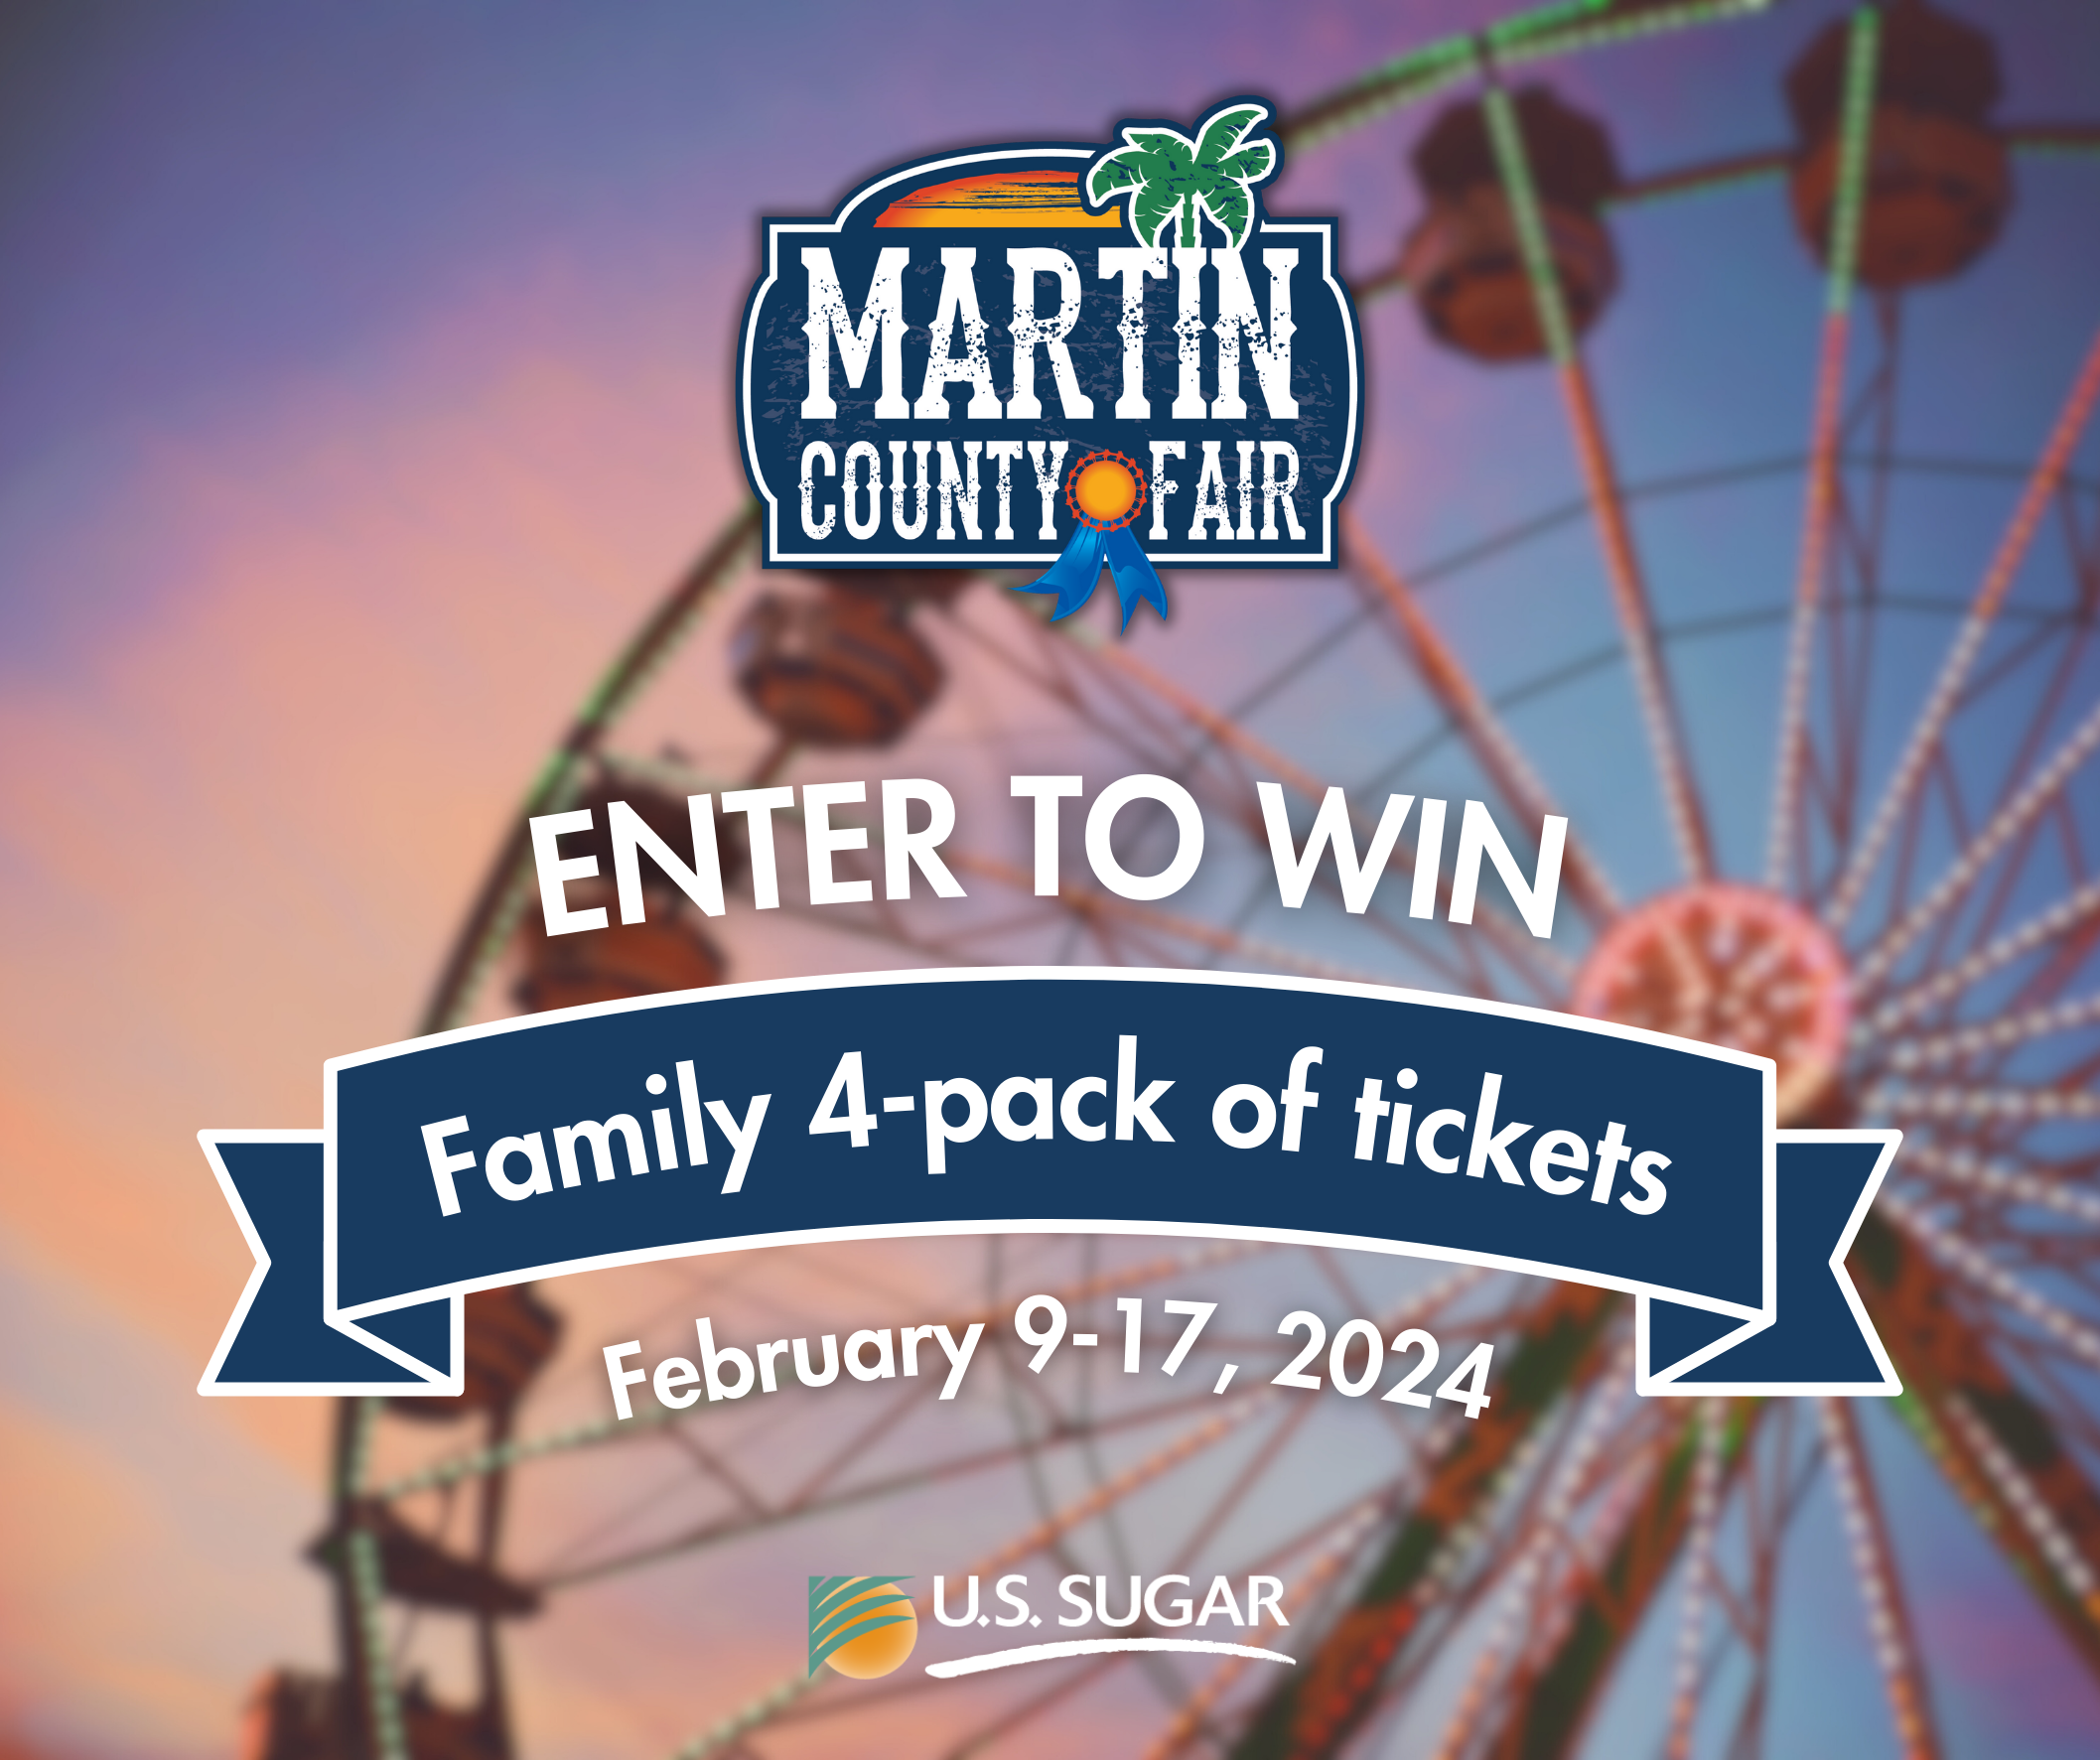 ENTER TO WIN! Here is your chance to win a free family 4-pack of tickets to the Martin County Fair.